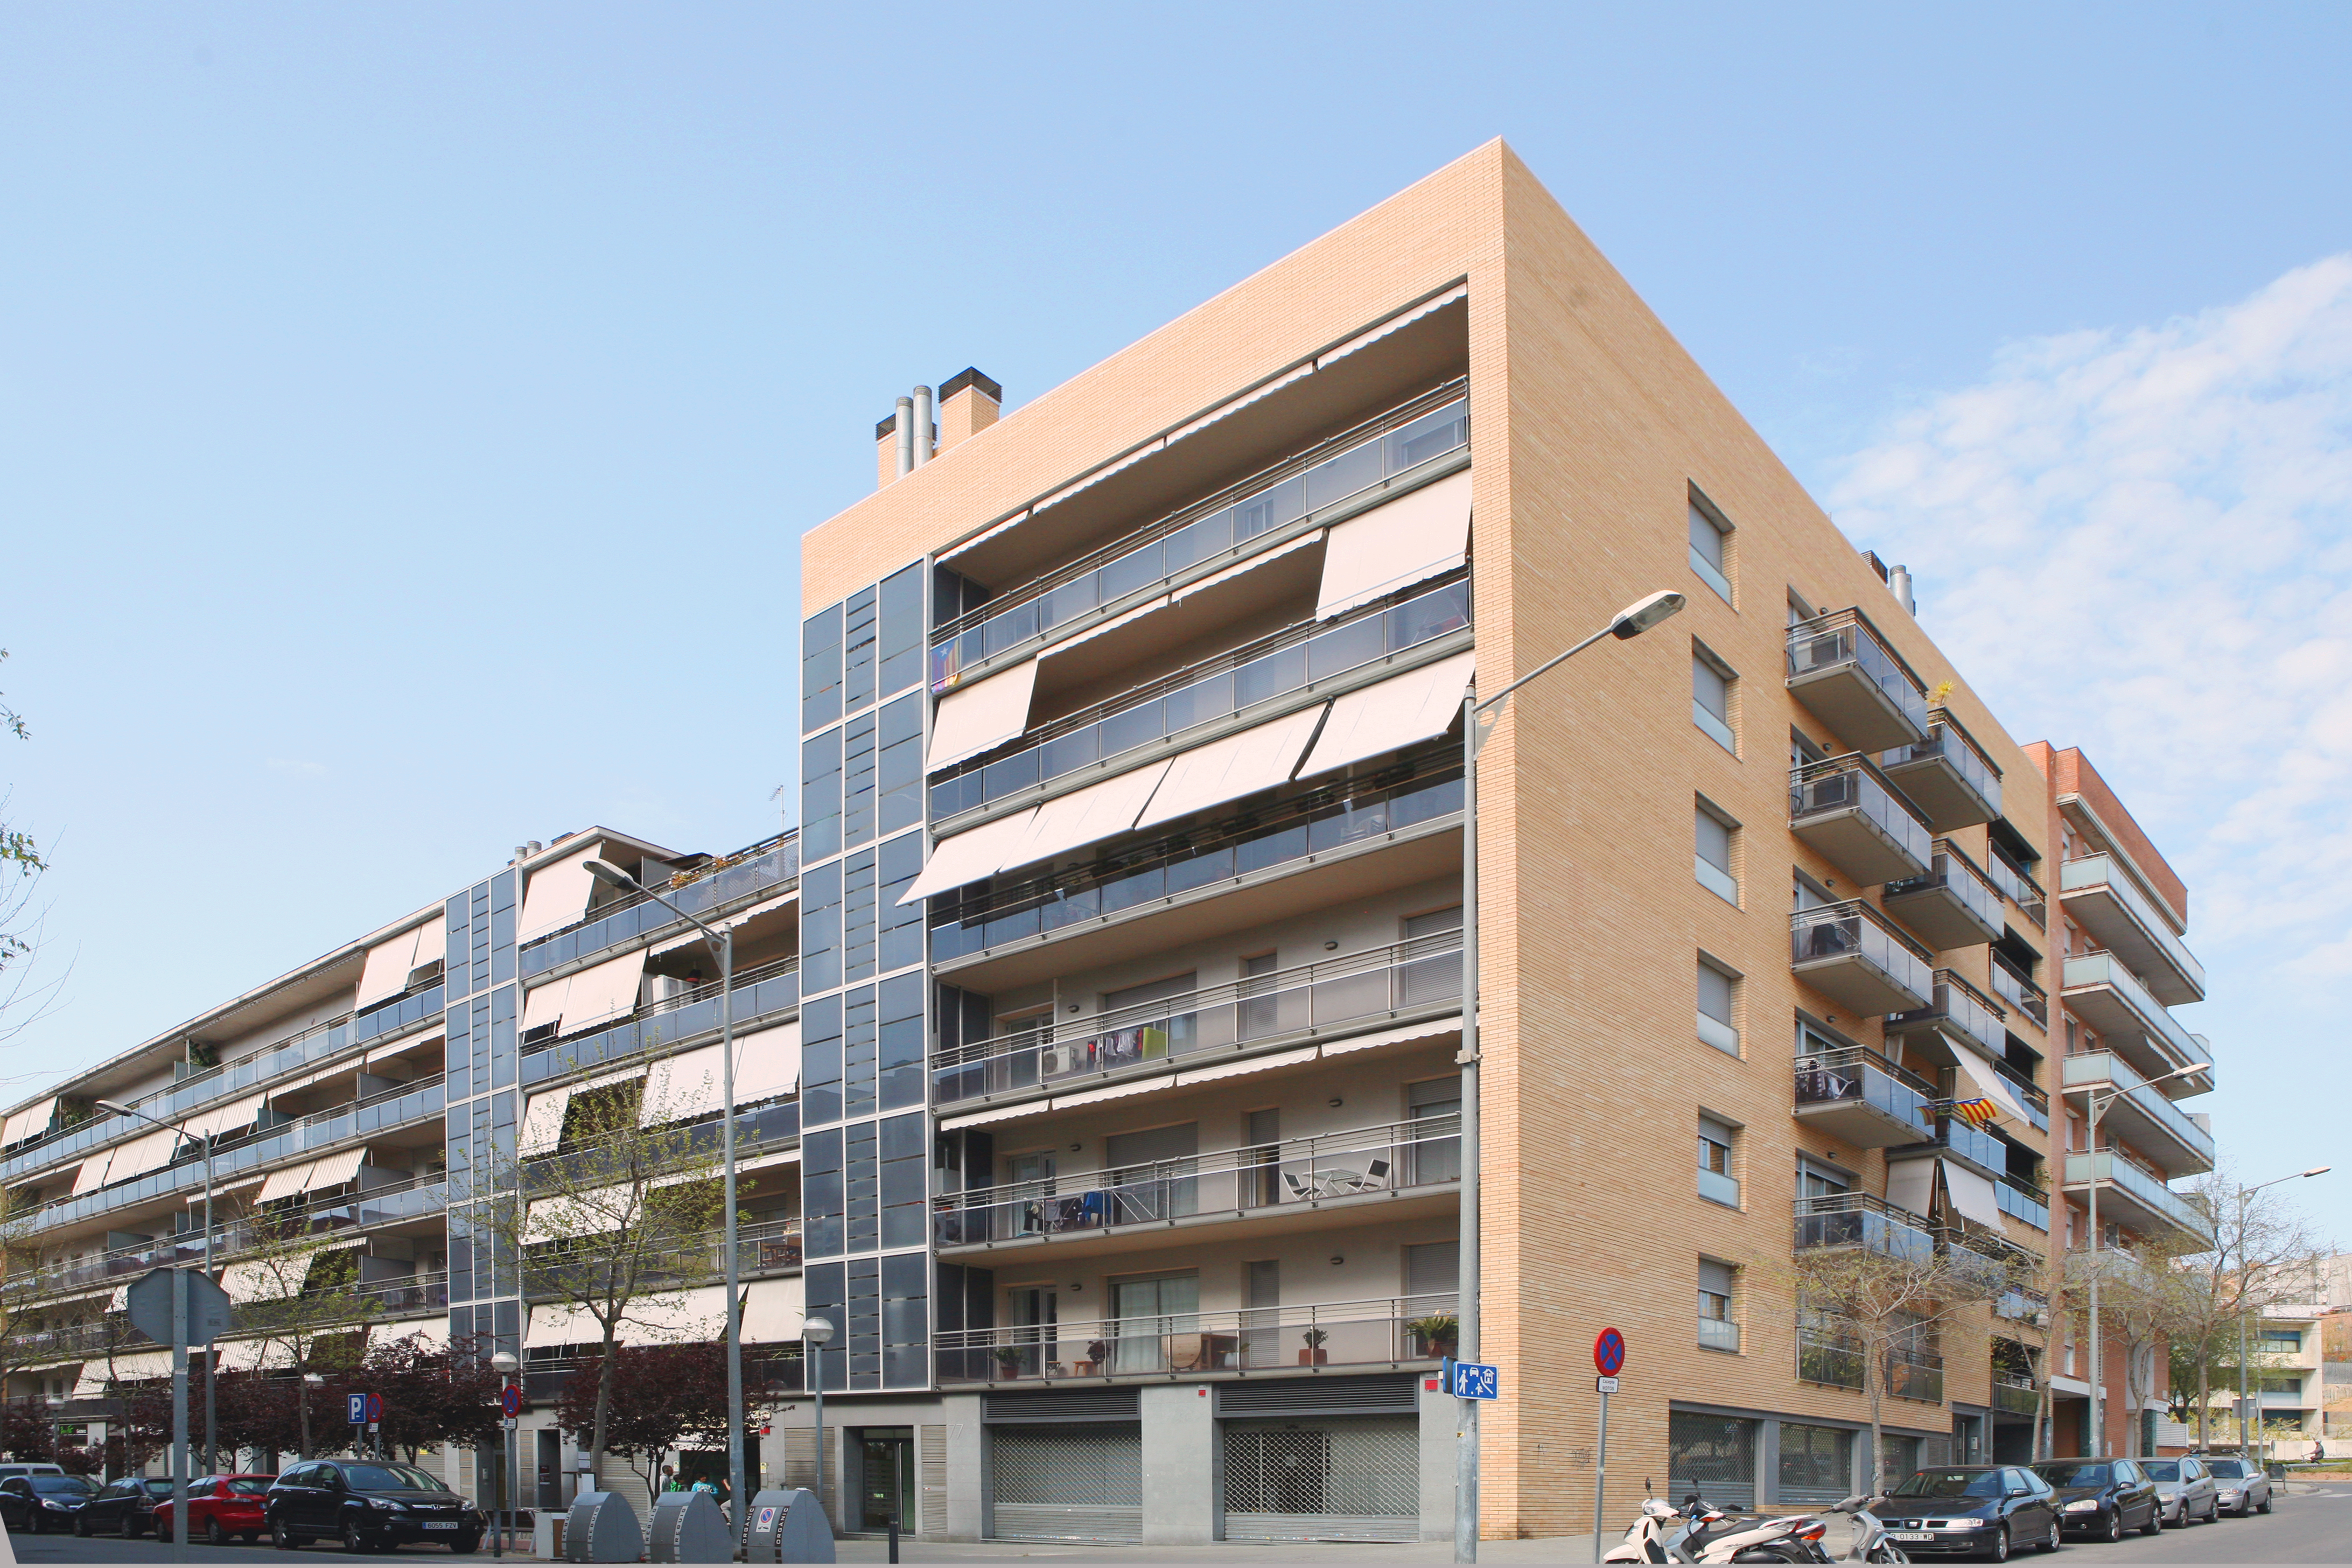 9 Parc Central Residencial 